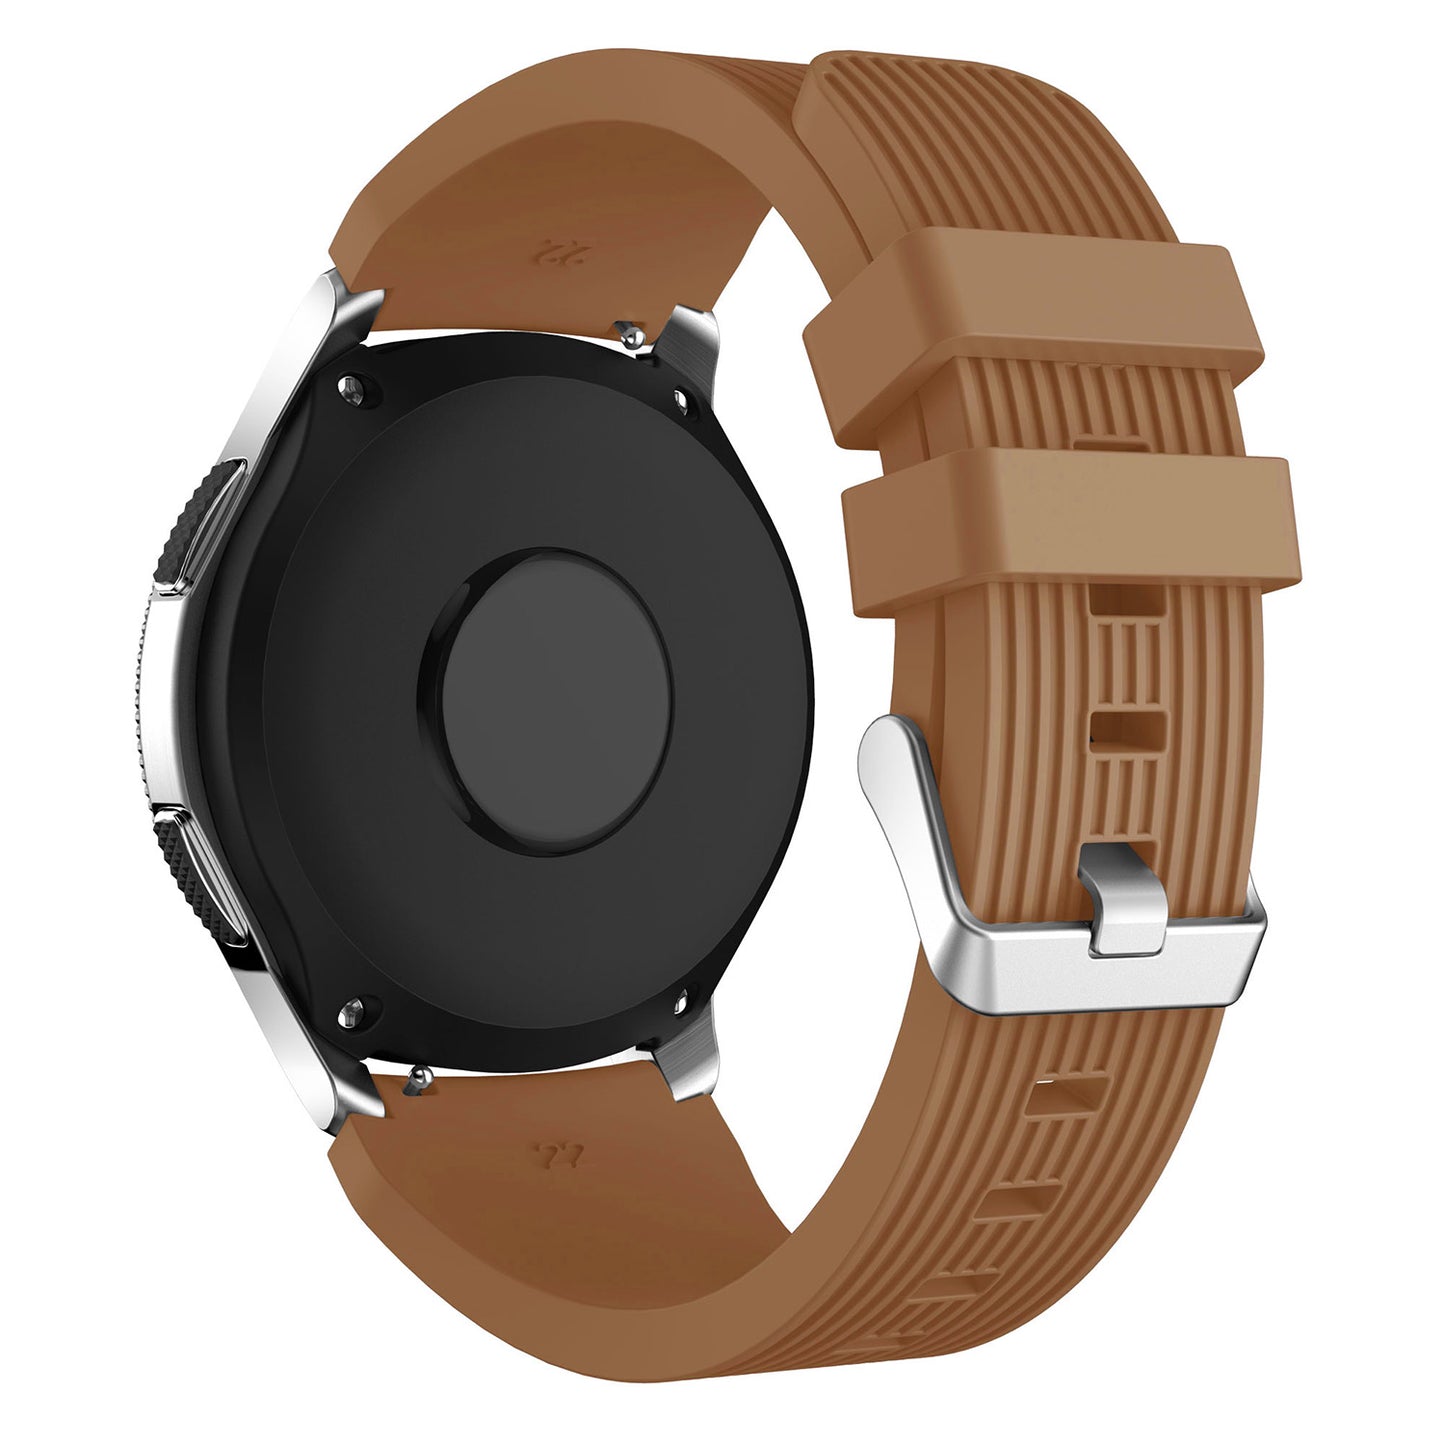 Rubber Strap for Samsung Galaxy Watch 46mm, Gear S3 & Others